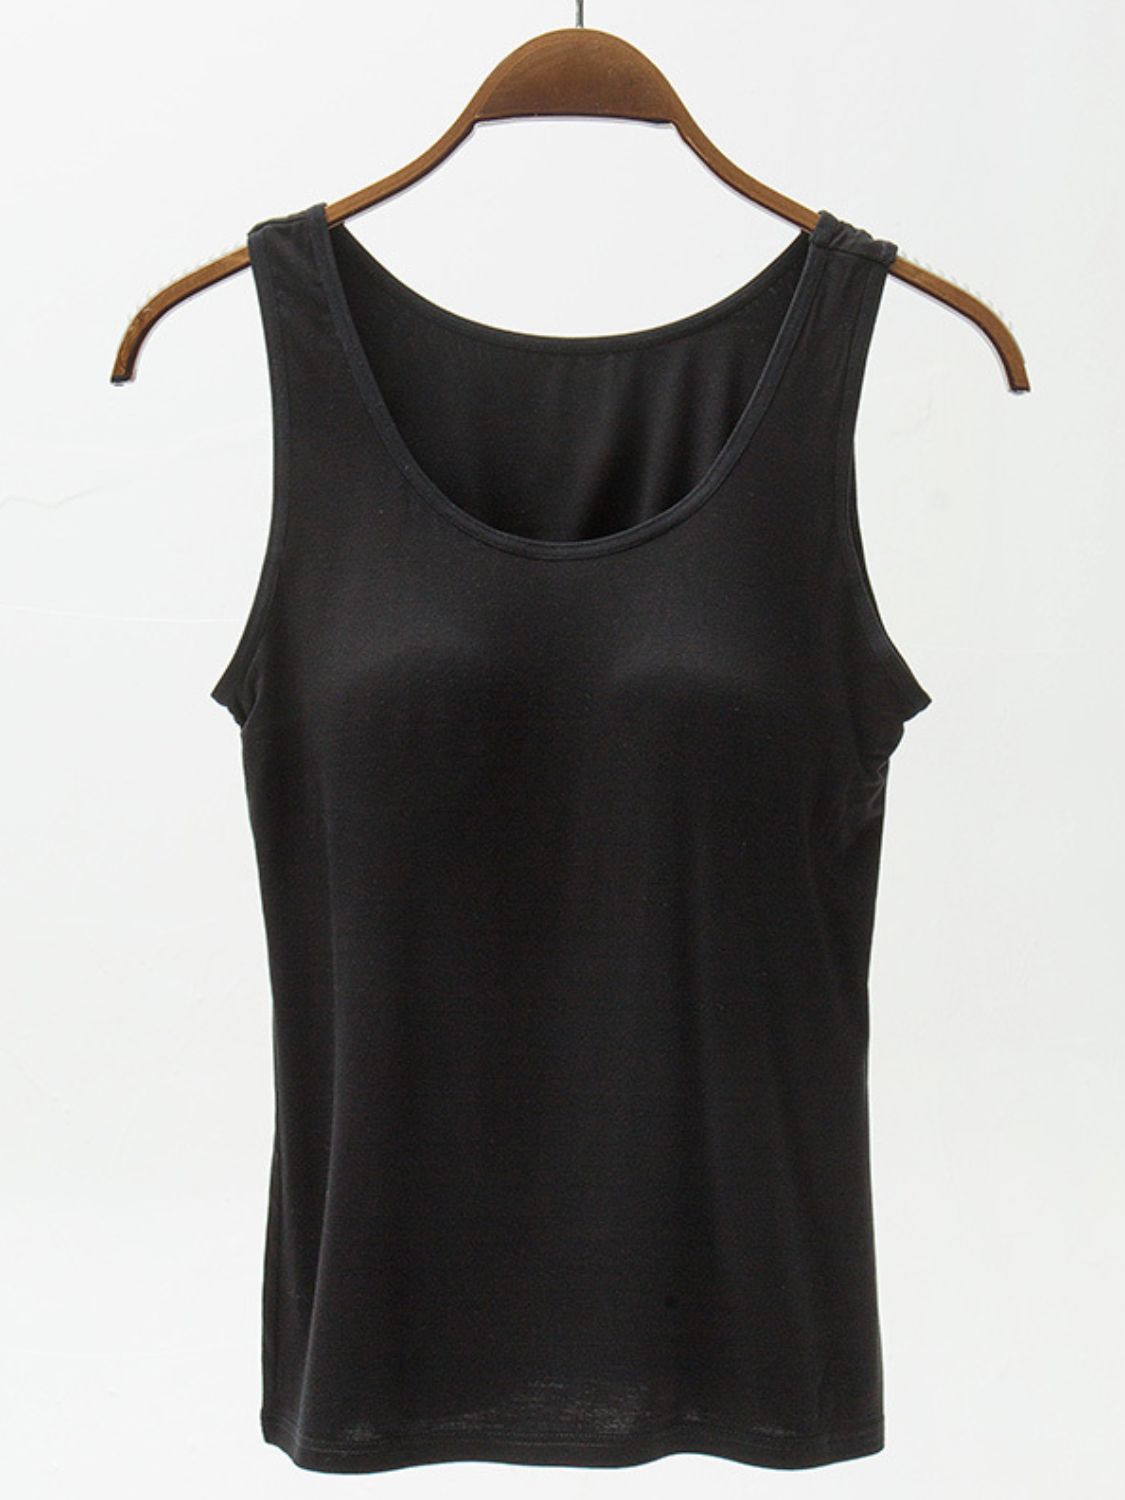 Modal Bralette Tank Top with Wide Straps